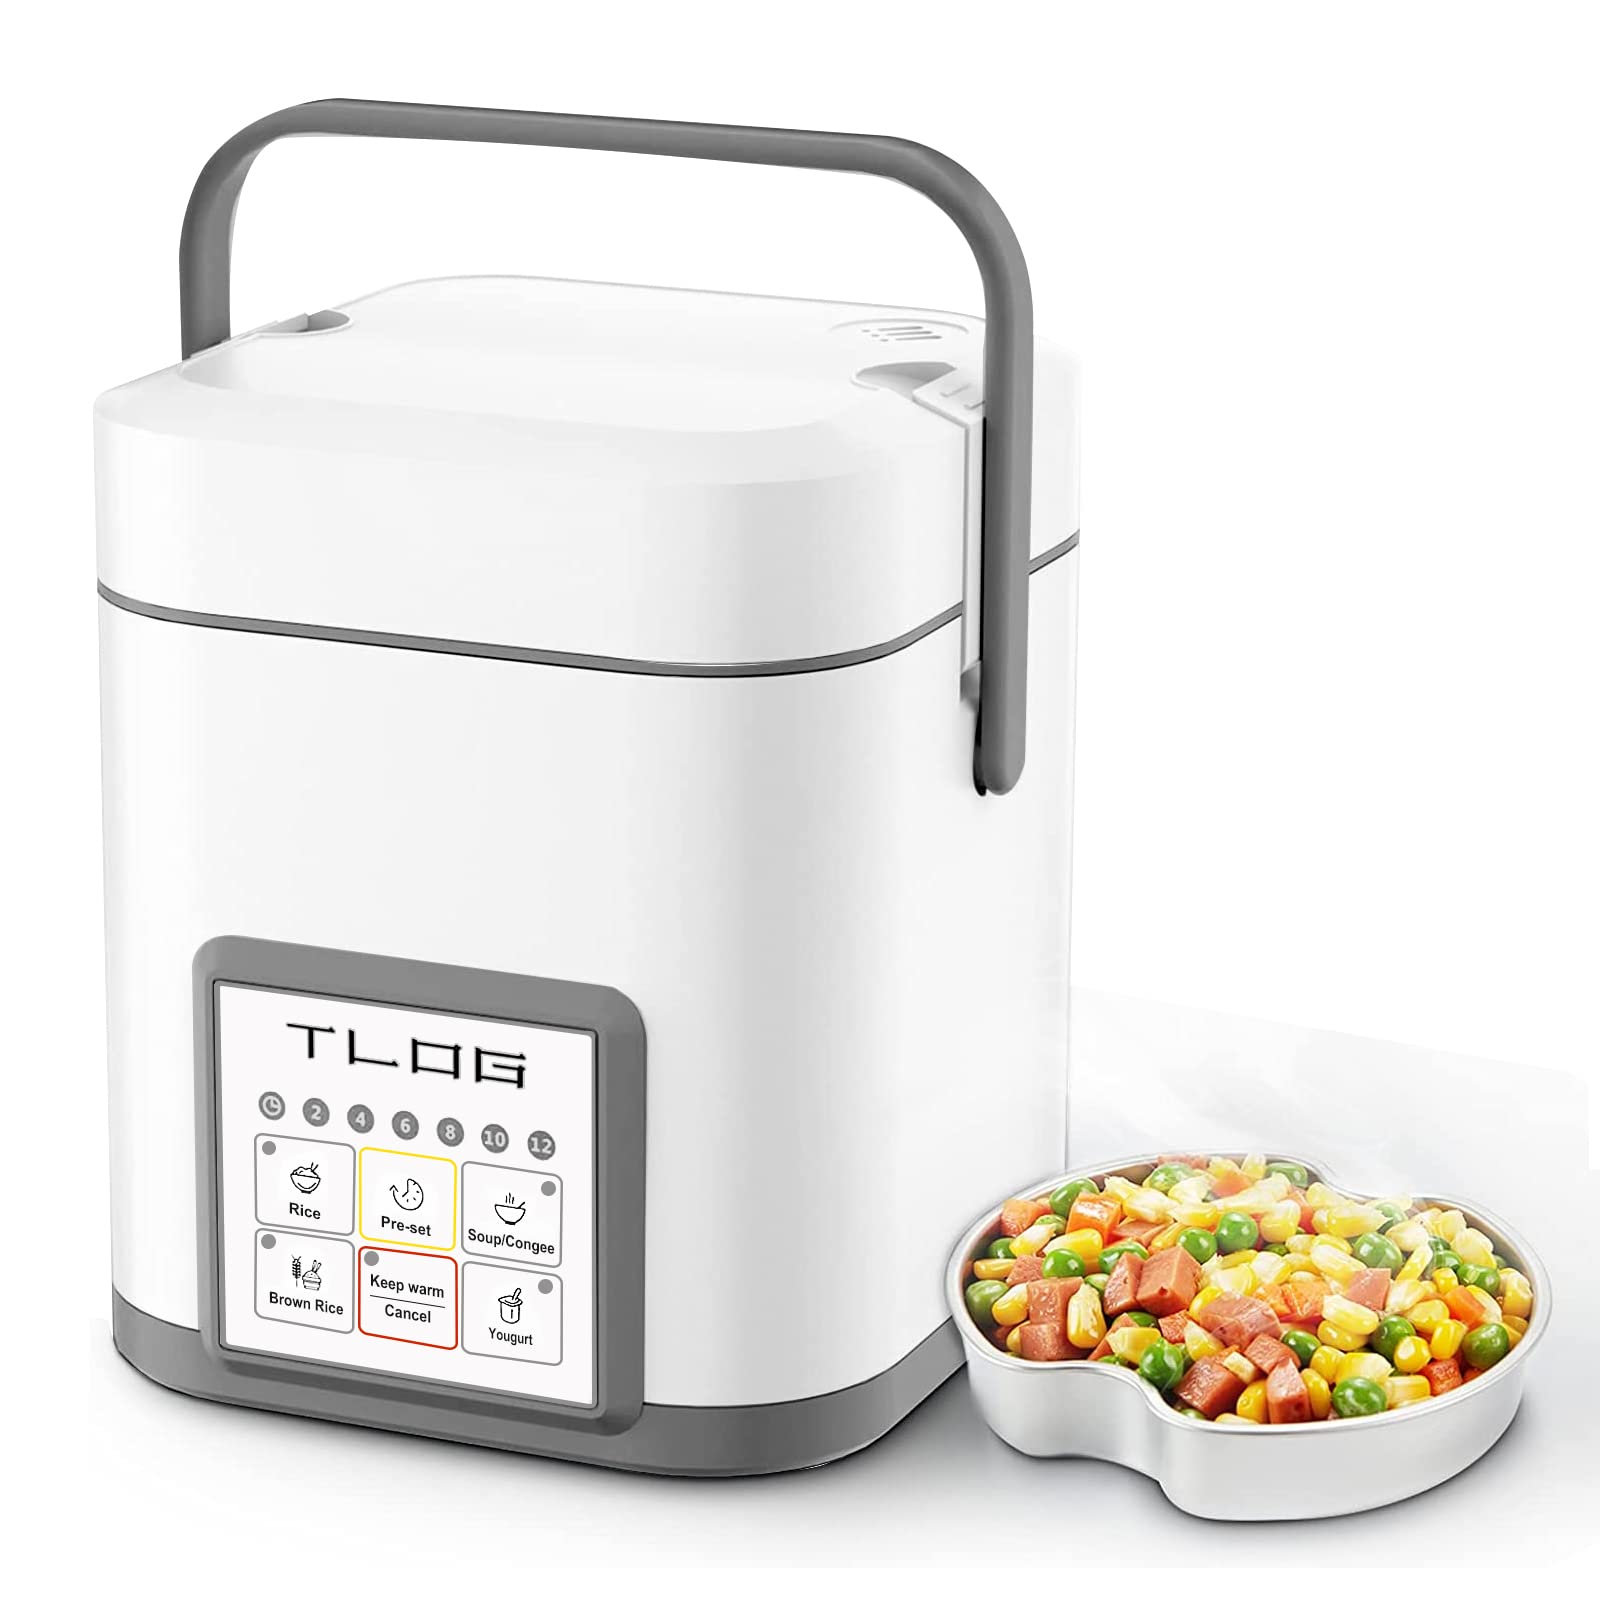 TLOg Mini Rice cooker 25 cups Uncooked, Healthy ceramic coating Portable Rice cooker, 12L Travel Rice cooker Small for 1-3 Peopl